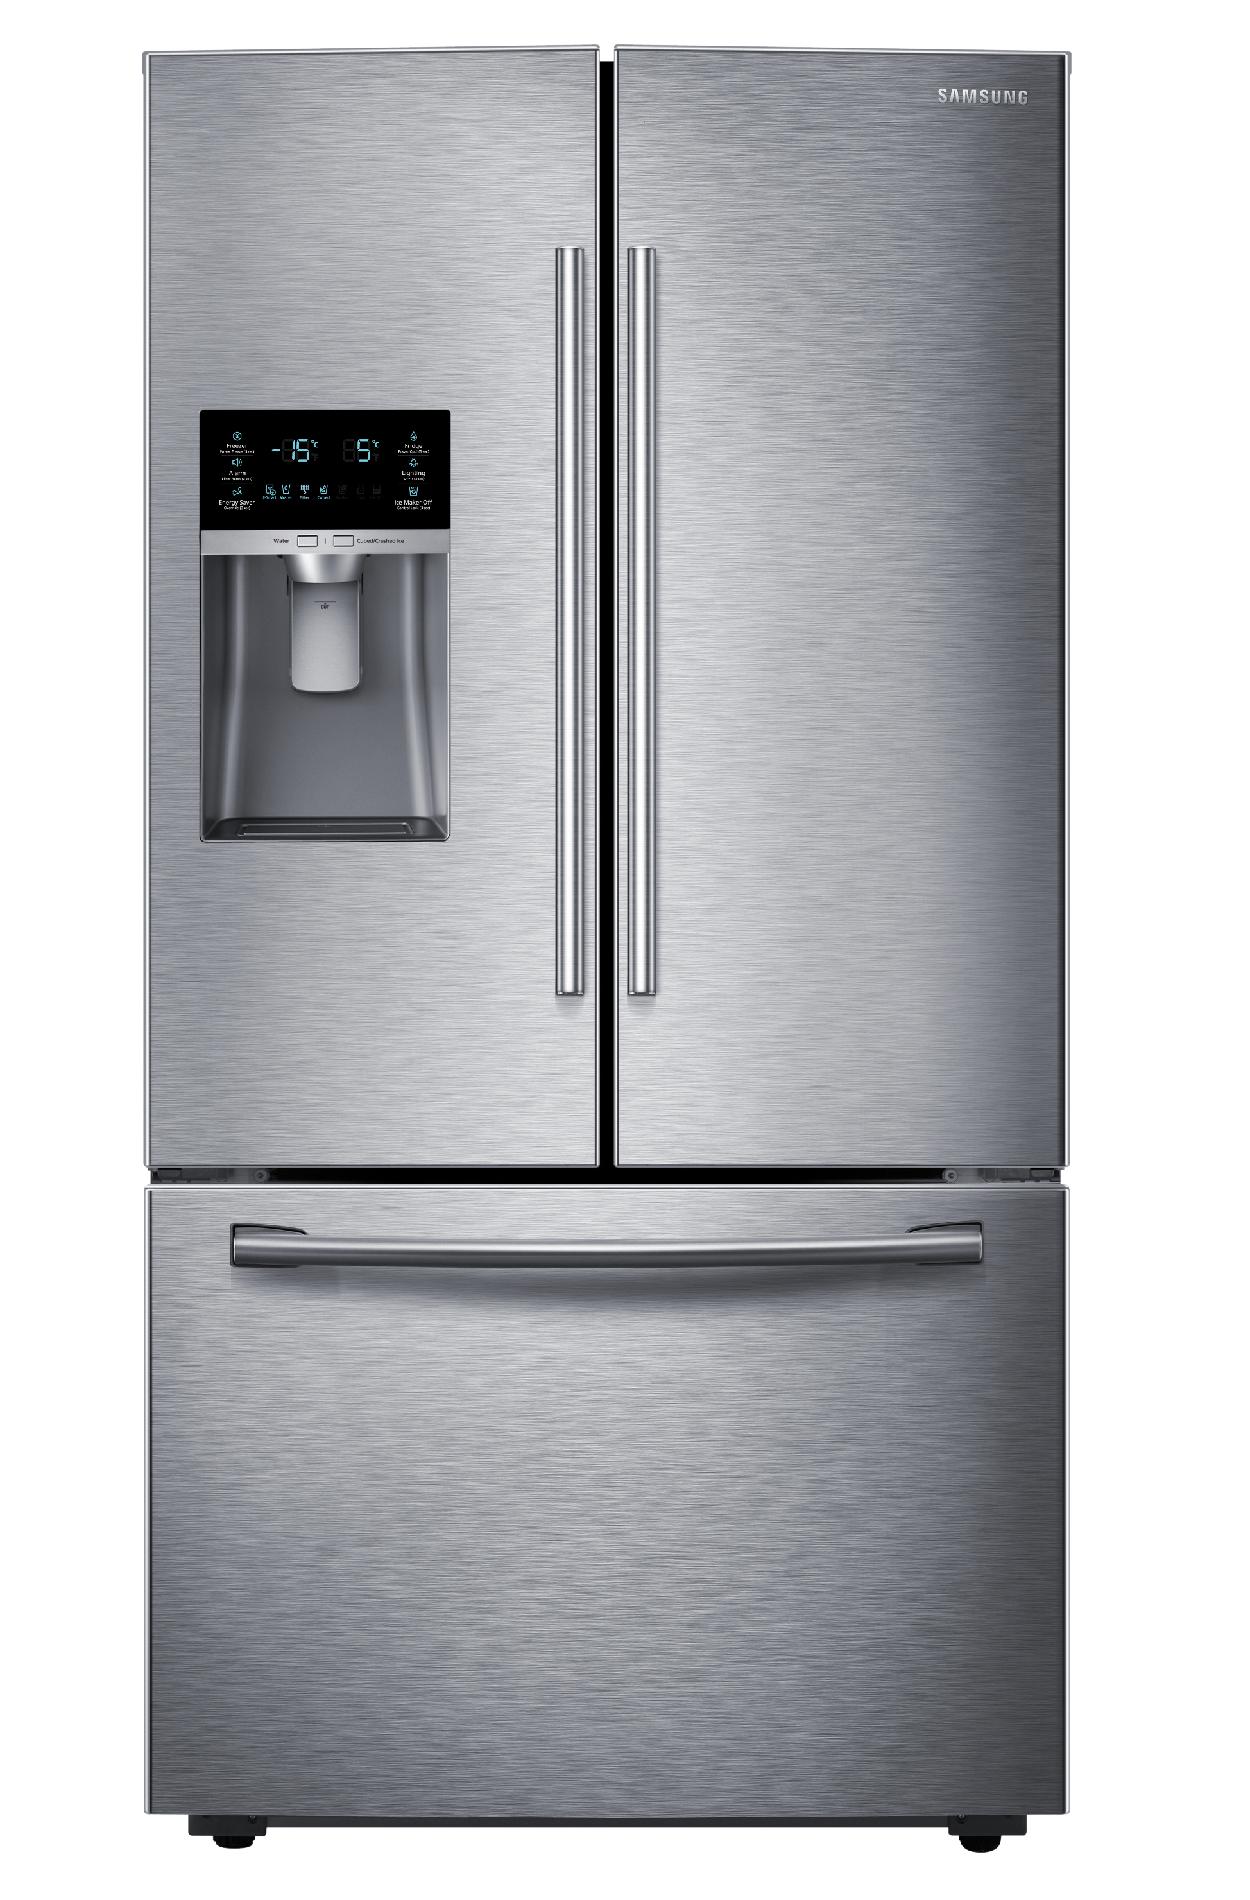 0887276966106 - RF23HCEDBSR/AA 22.5 CU. FT. FRENCH DOOR REFRIGERATOR - STAINLESS STEEL